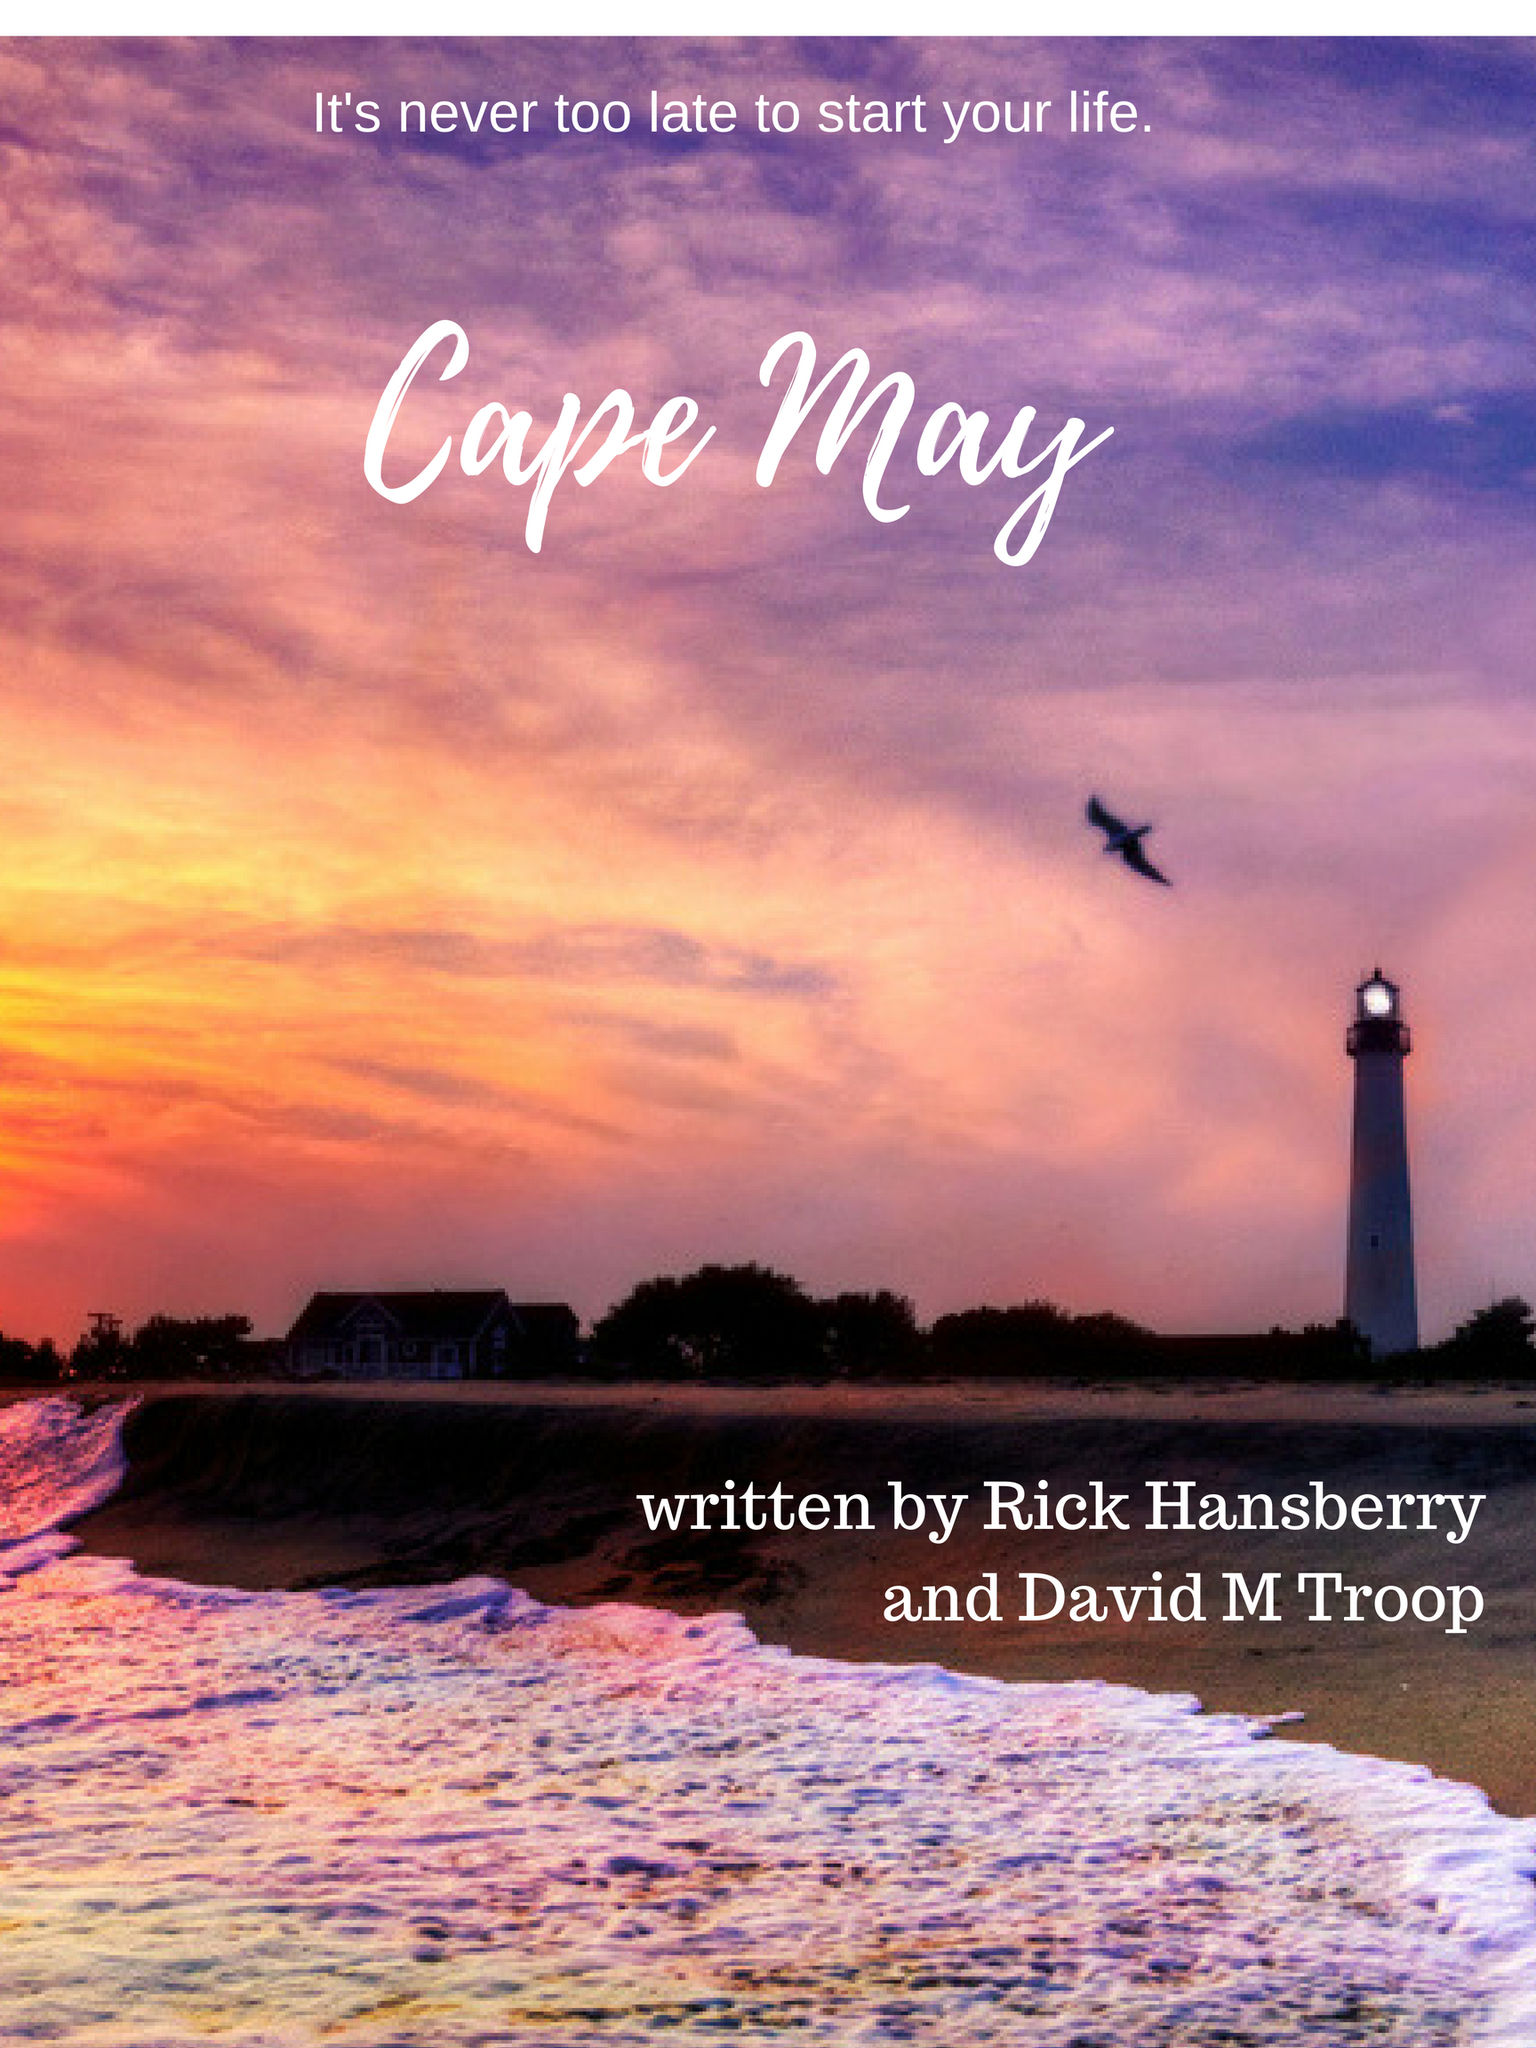 CAPE MAY